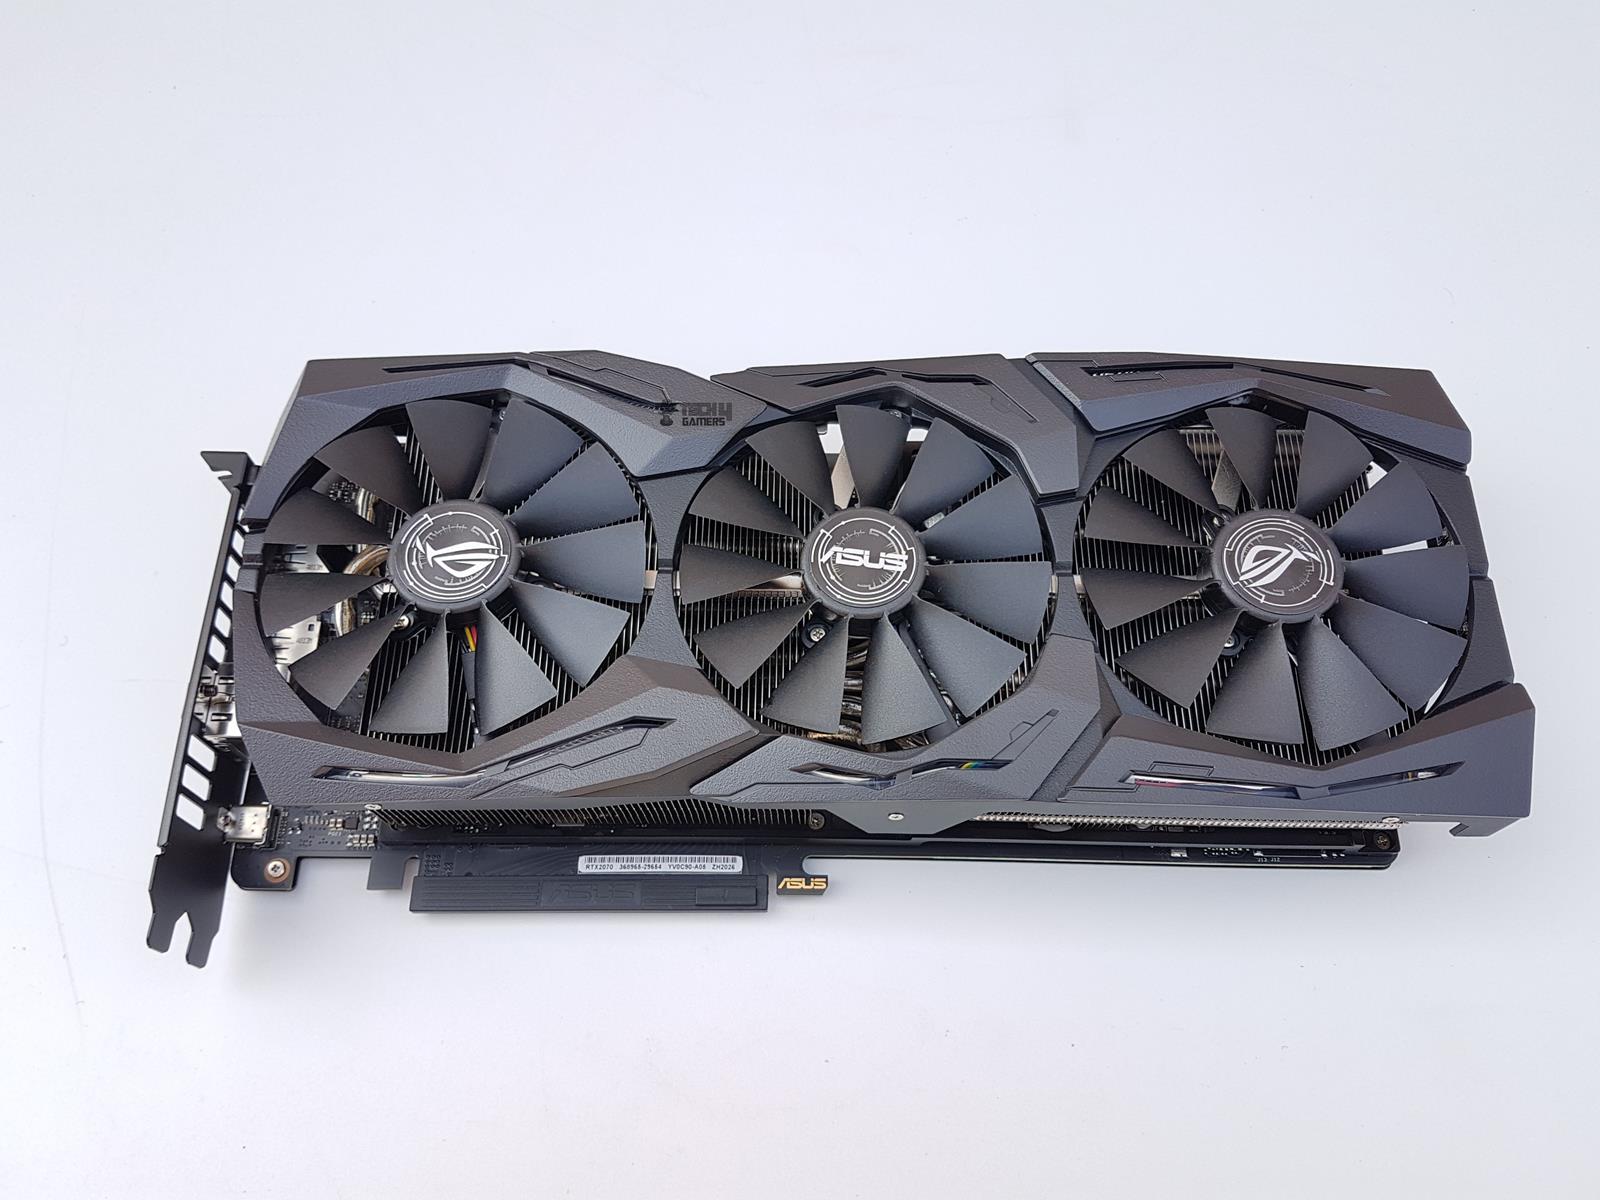 Asus Strix GeForce RTX 2070 O8G Graphics Card Review